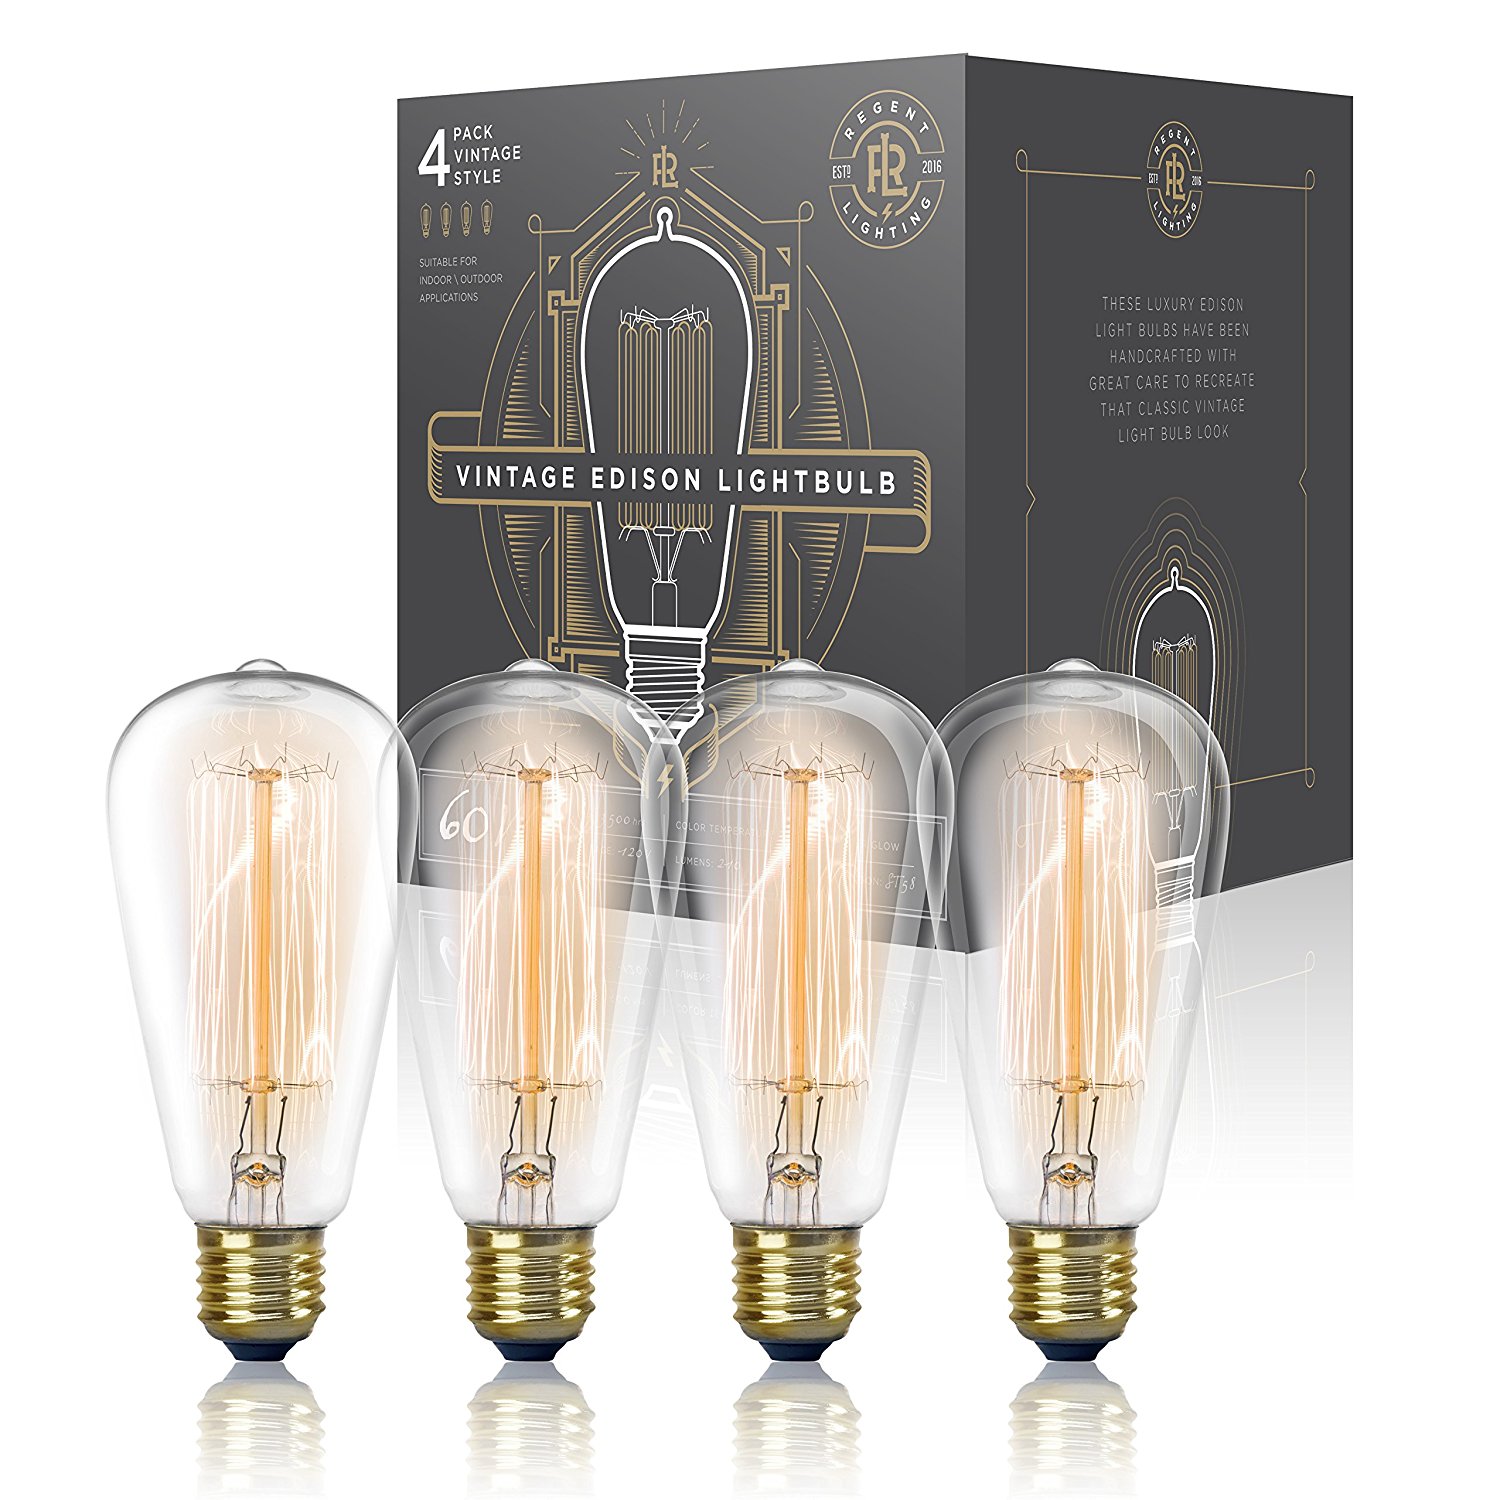 Vintage Edison Light Bulb 60W (4 Pack) - Dimmable Exposed Filament ...